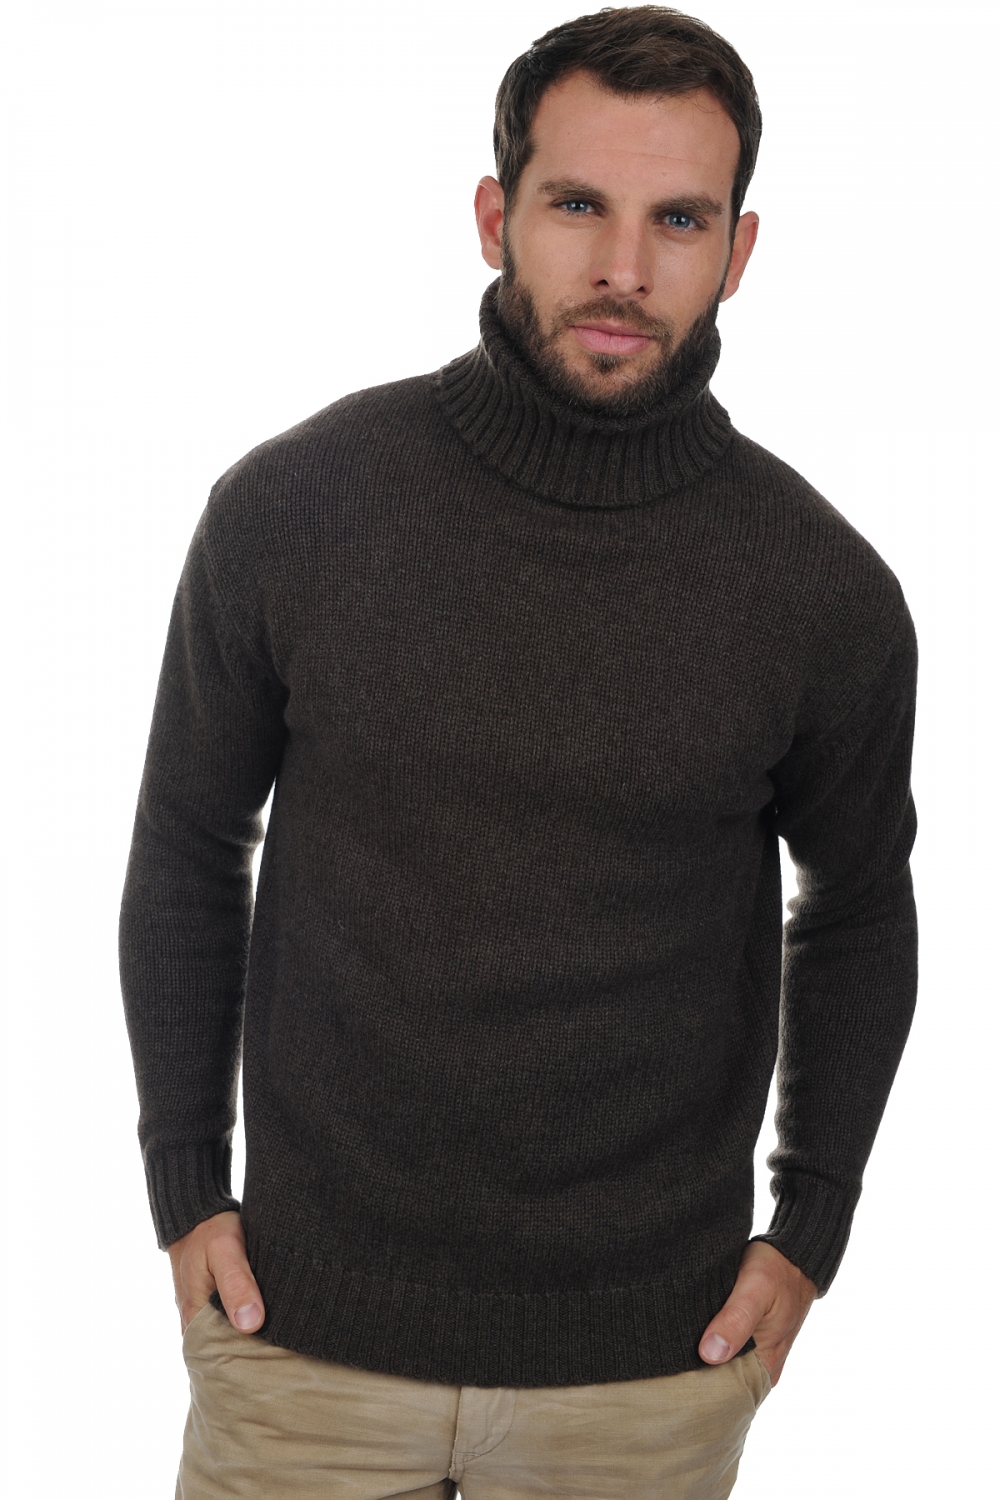 Roll neck chunky pullover 100% cashmere, 10 ply.